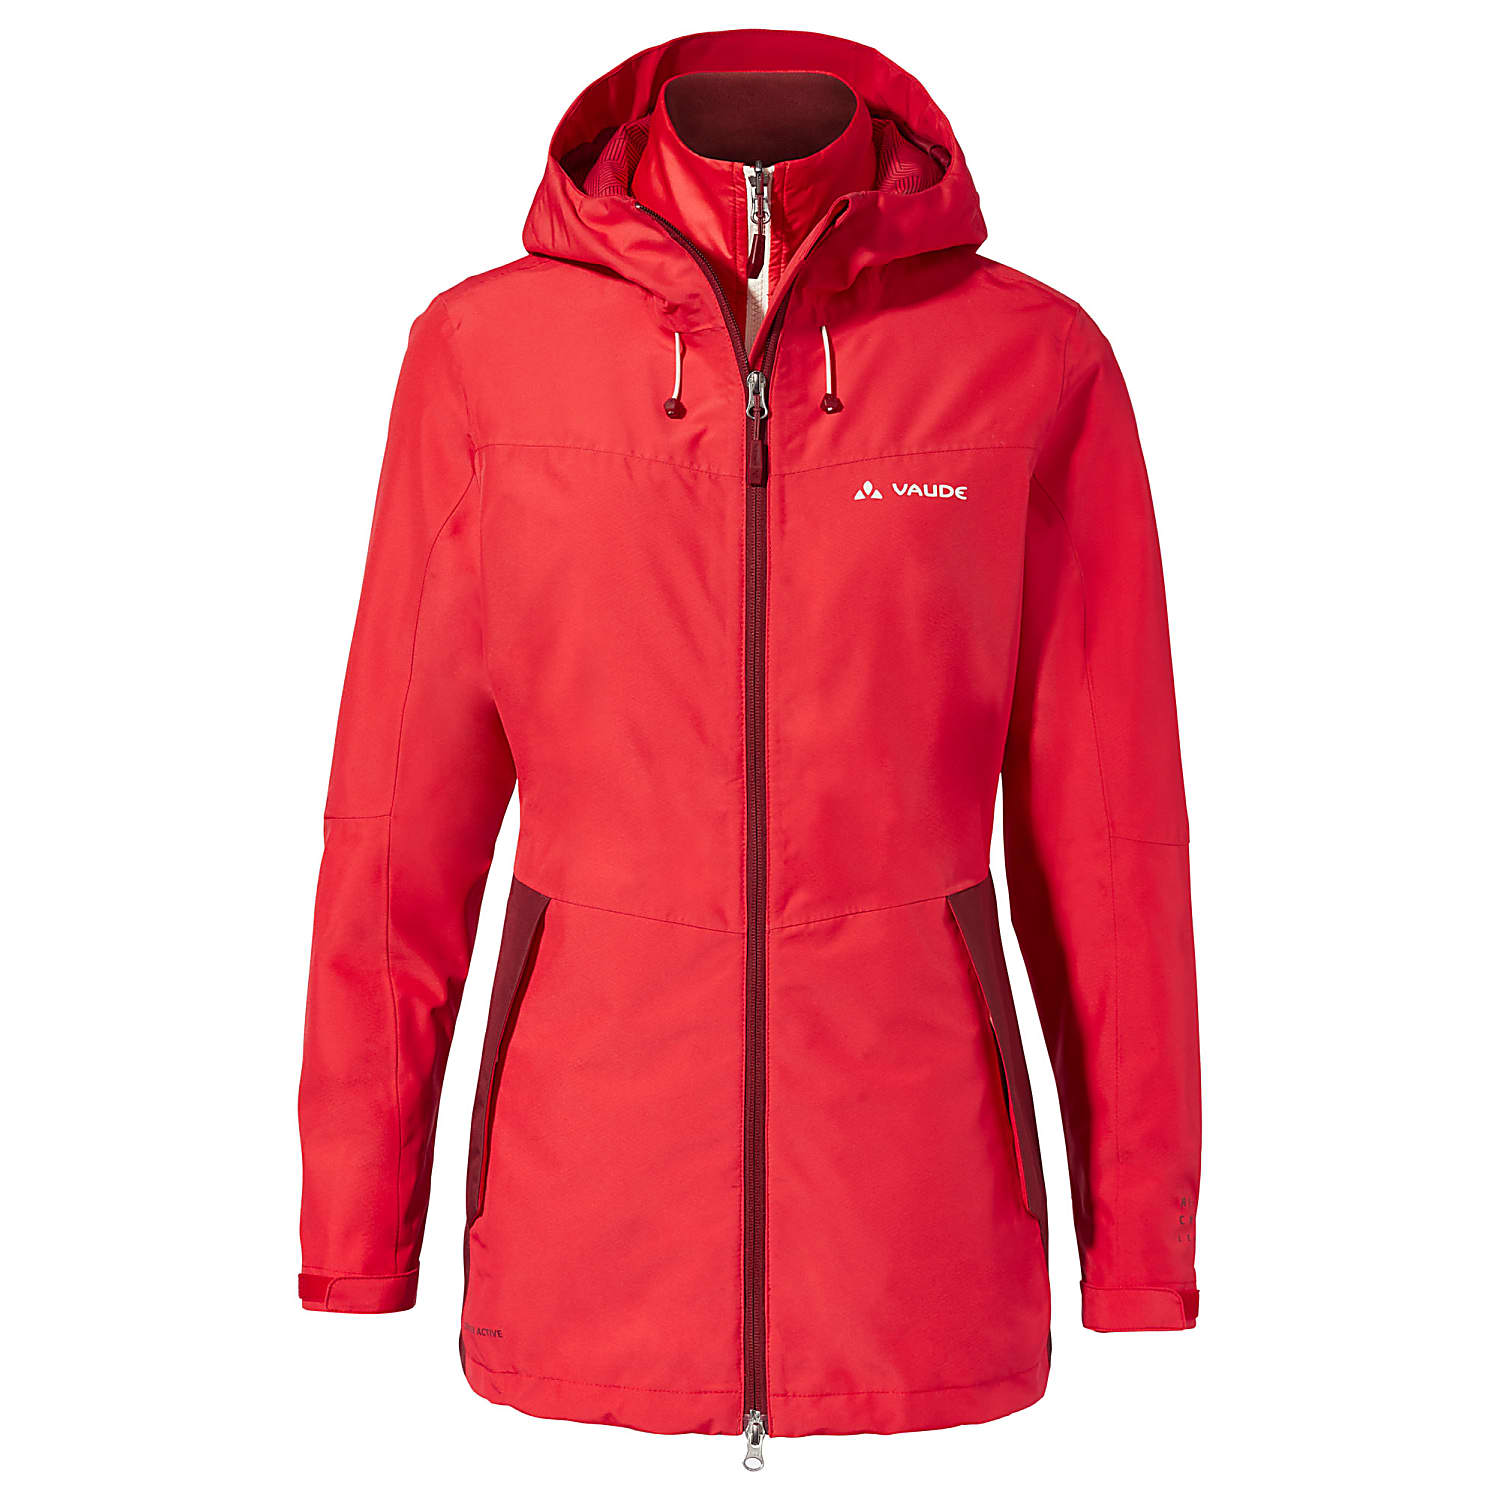 and VALSORDA cheap - Flame shipping Vaude WOMENS JACKET, 3IN1 Fast